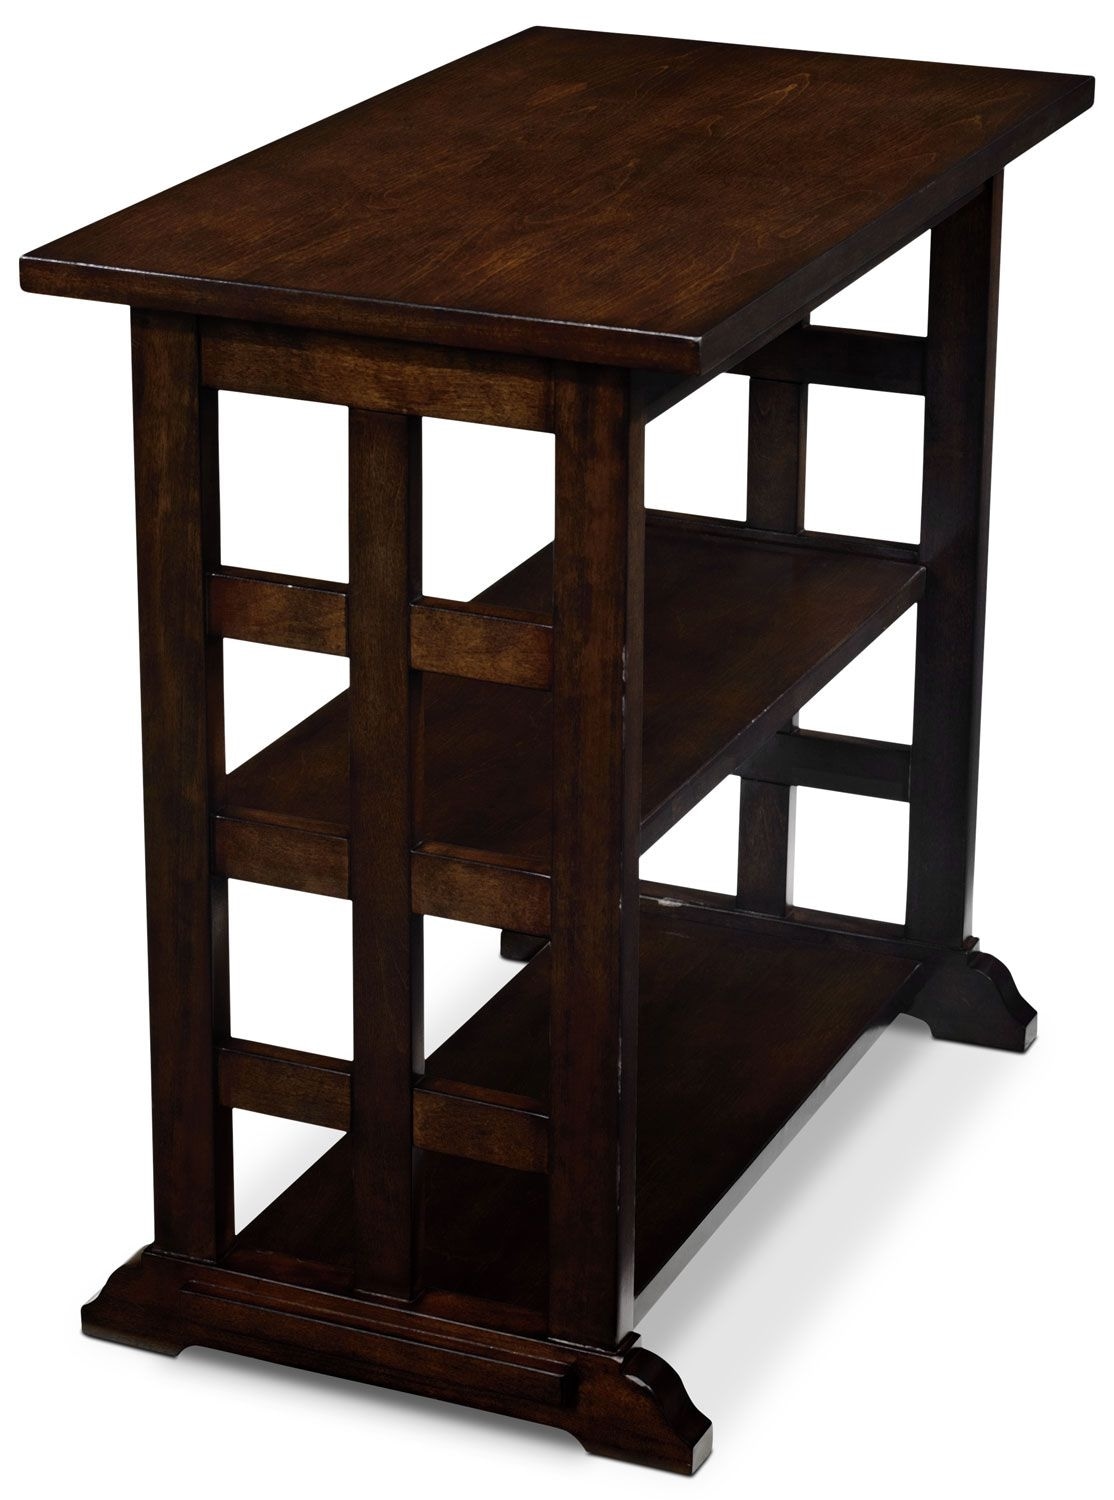 gander accent table dark brown the brick end tables coho furniture antique oak dining with claw feet space efficient blue bedside wine racks america beautiful mini fridge solid